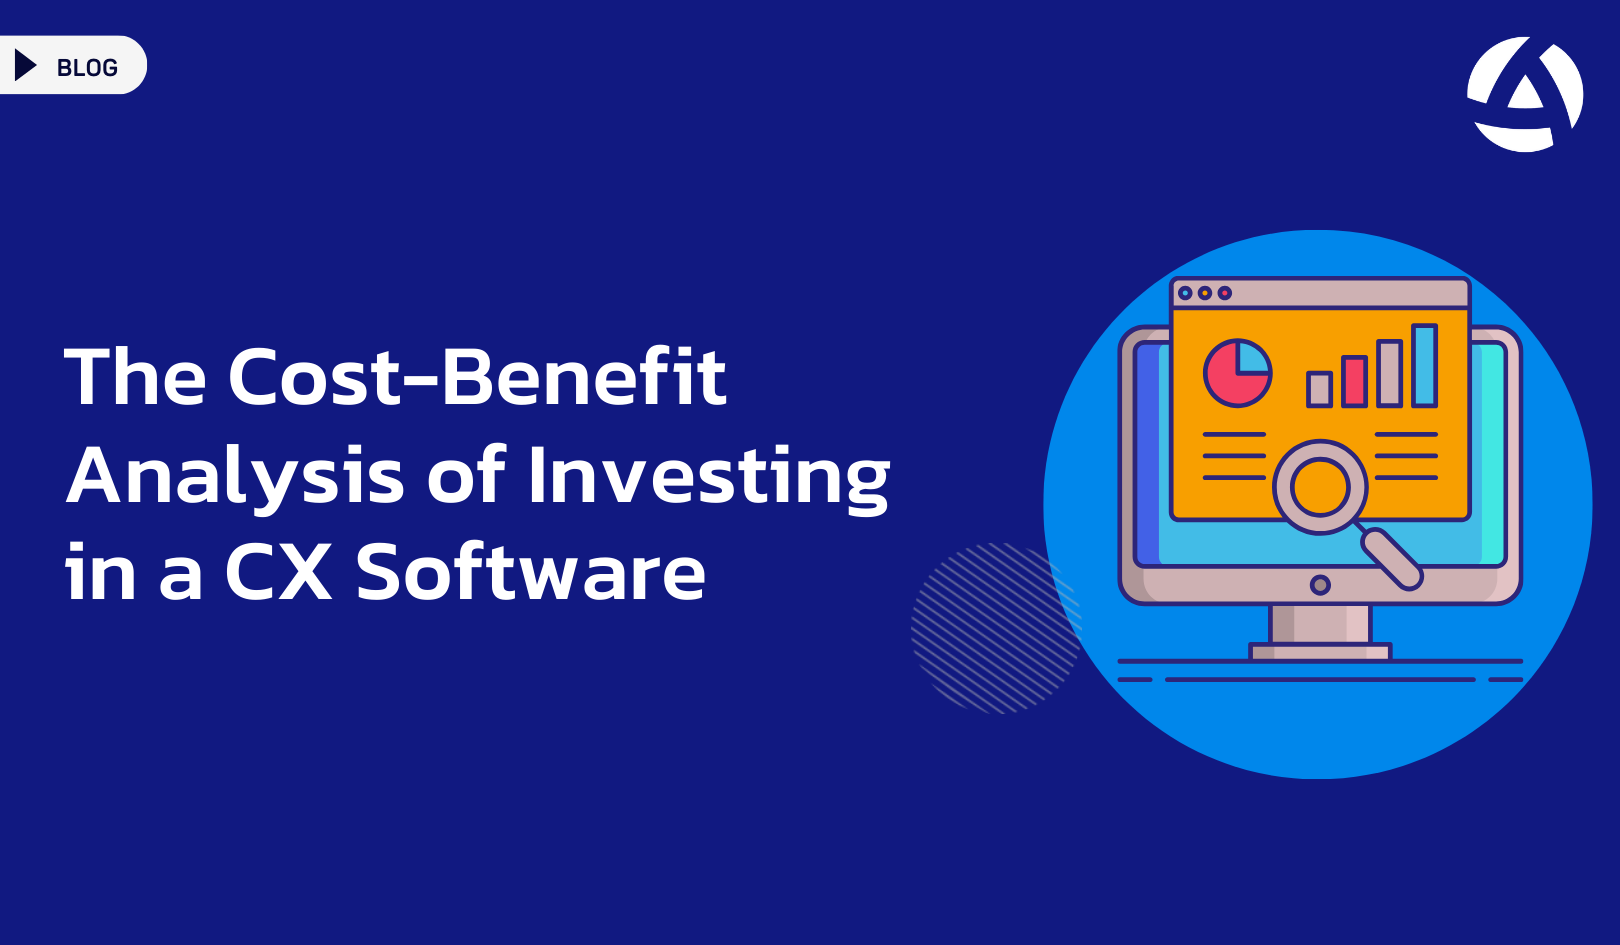 The Cost-Benefit Analysis of Investing in a CX Software